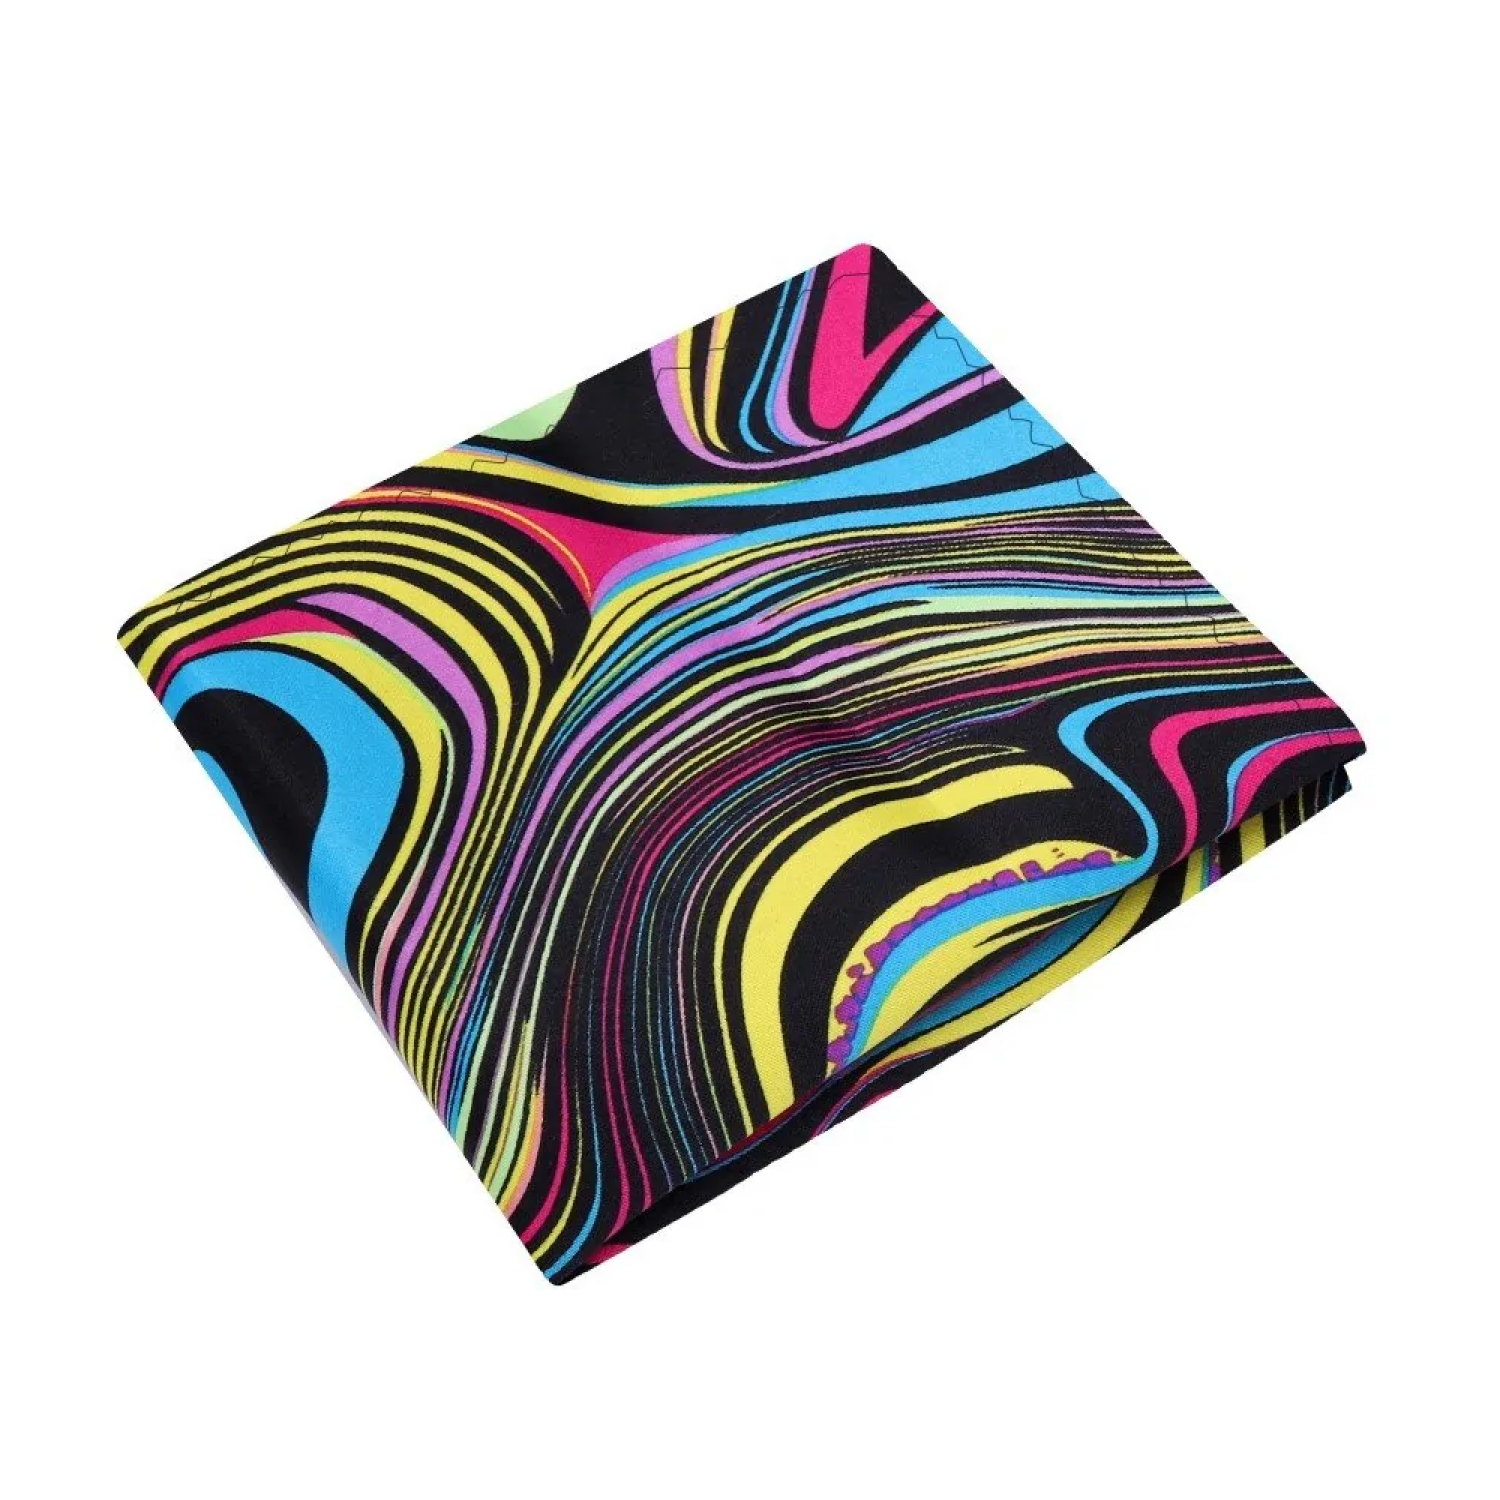 Blue, Yellow, Pink and Black Swirl Pocket Square